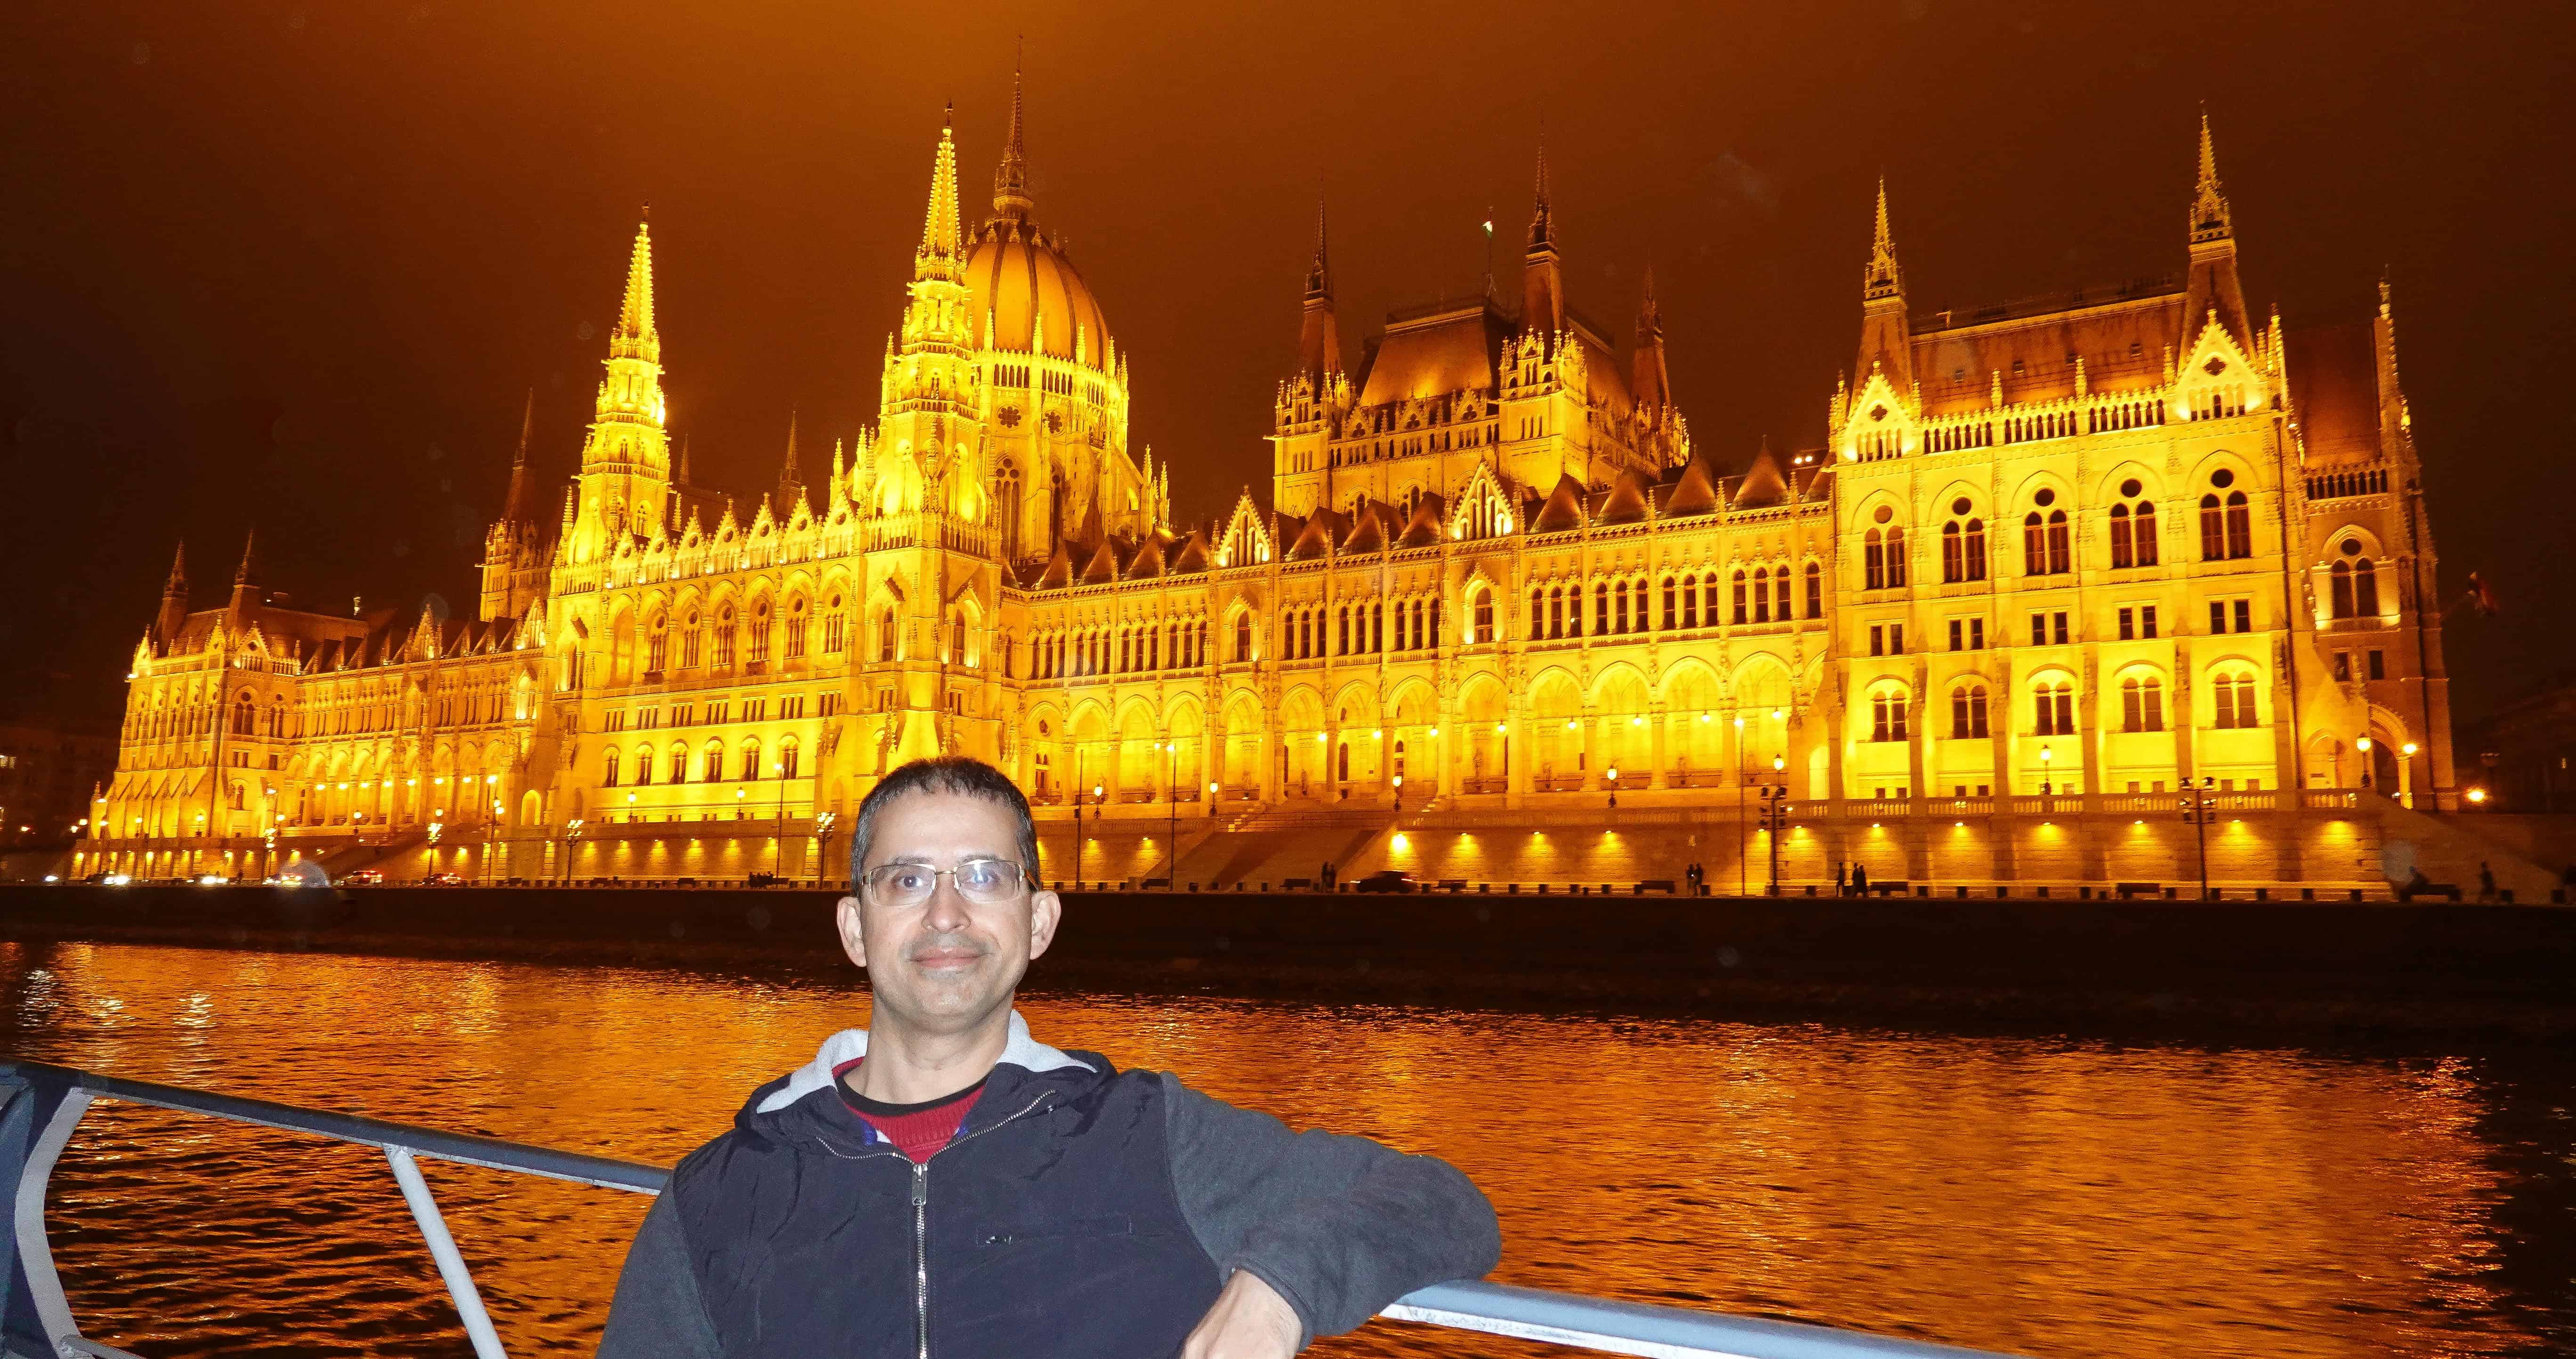 Hungarian Parliament building in Budapest at night from Danube River